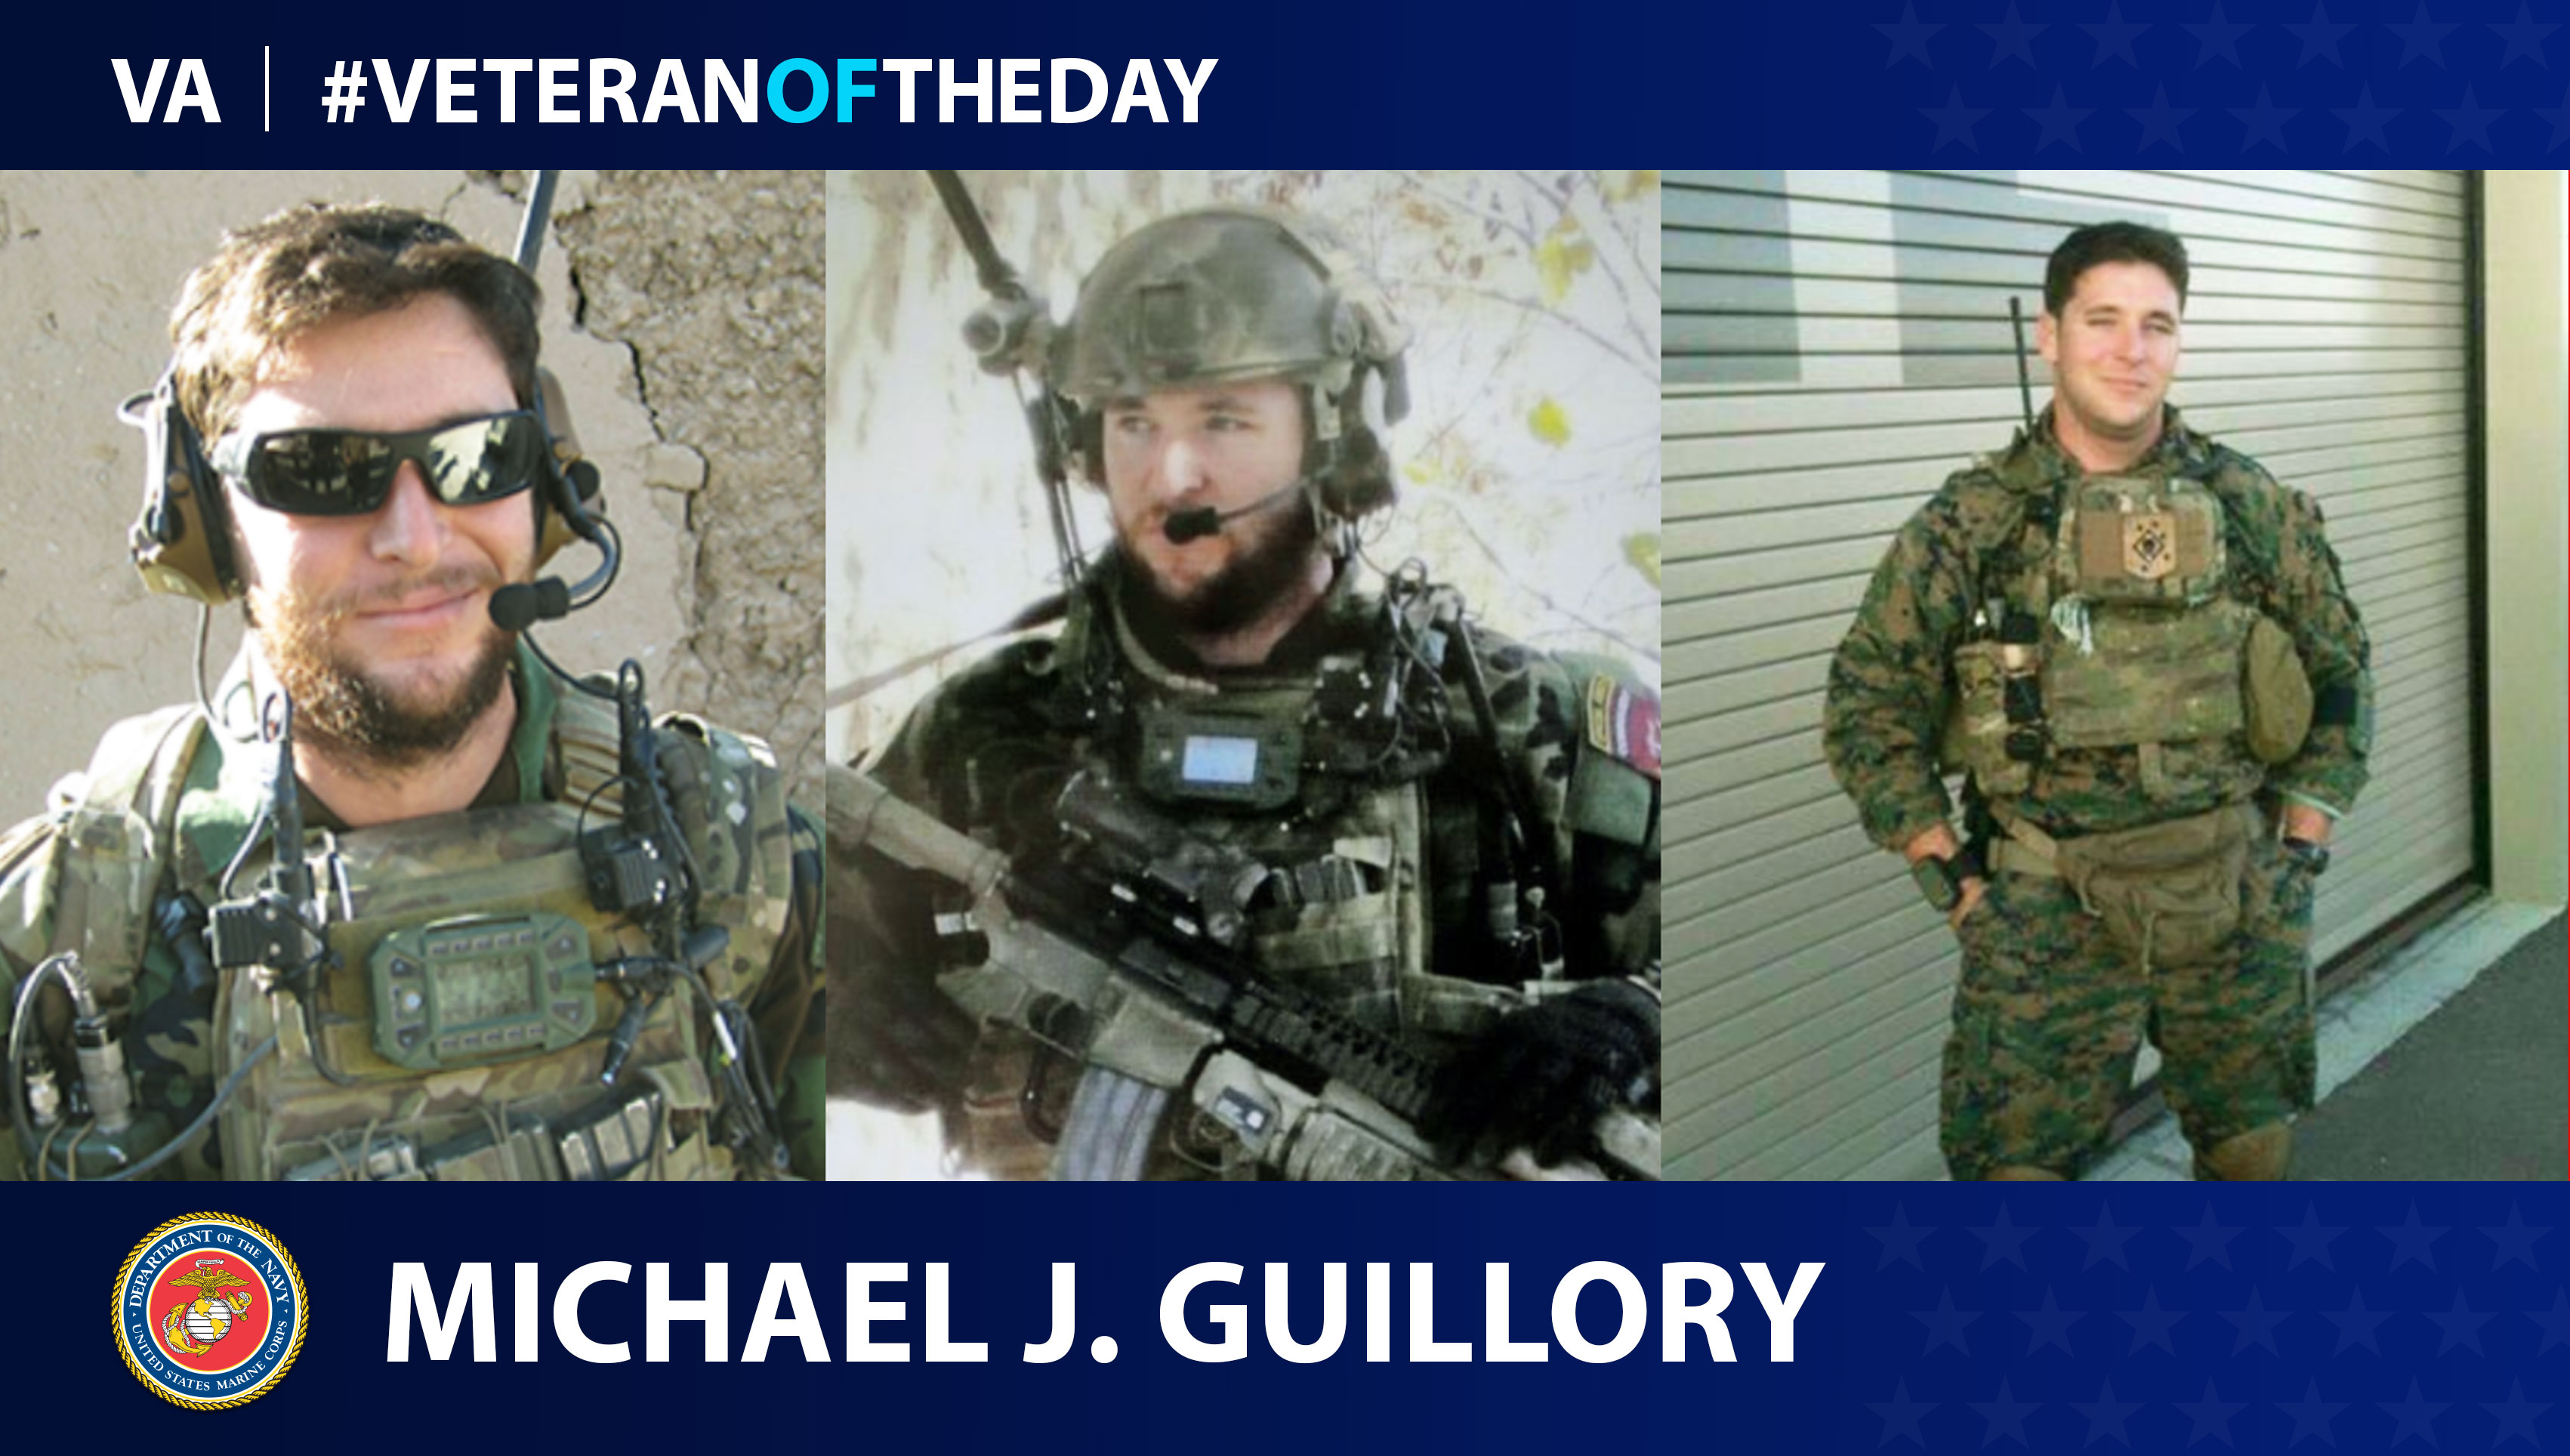 Michael Guillory is today's Veteran of the Day.